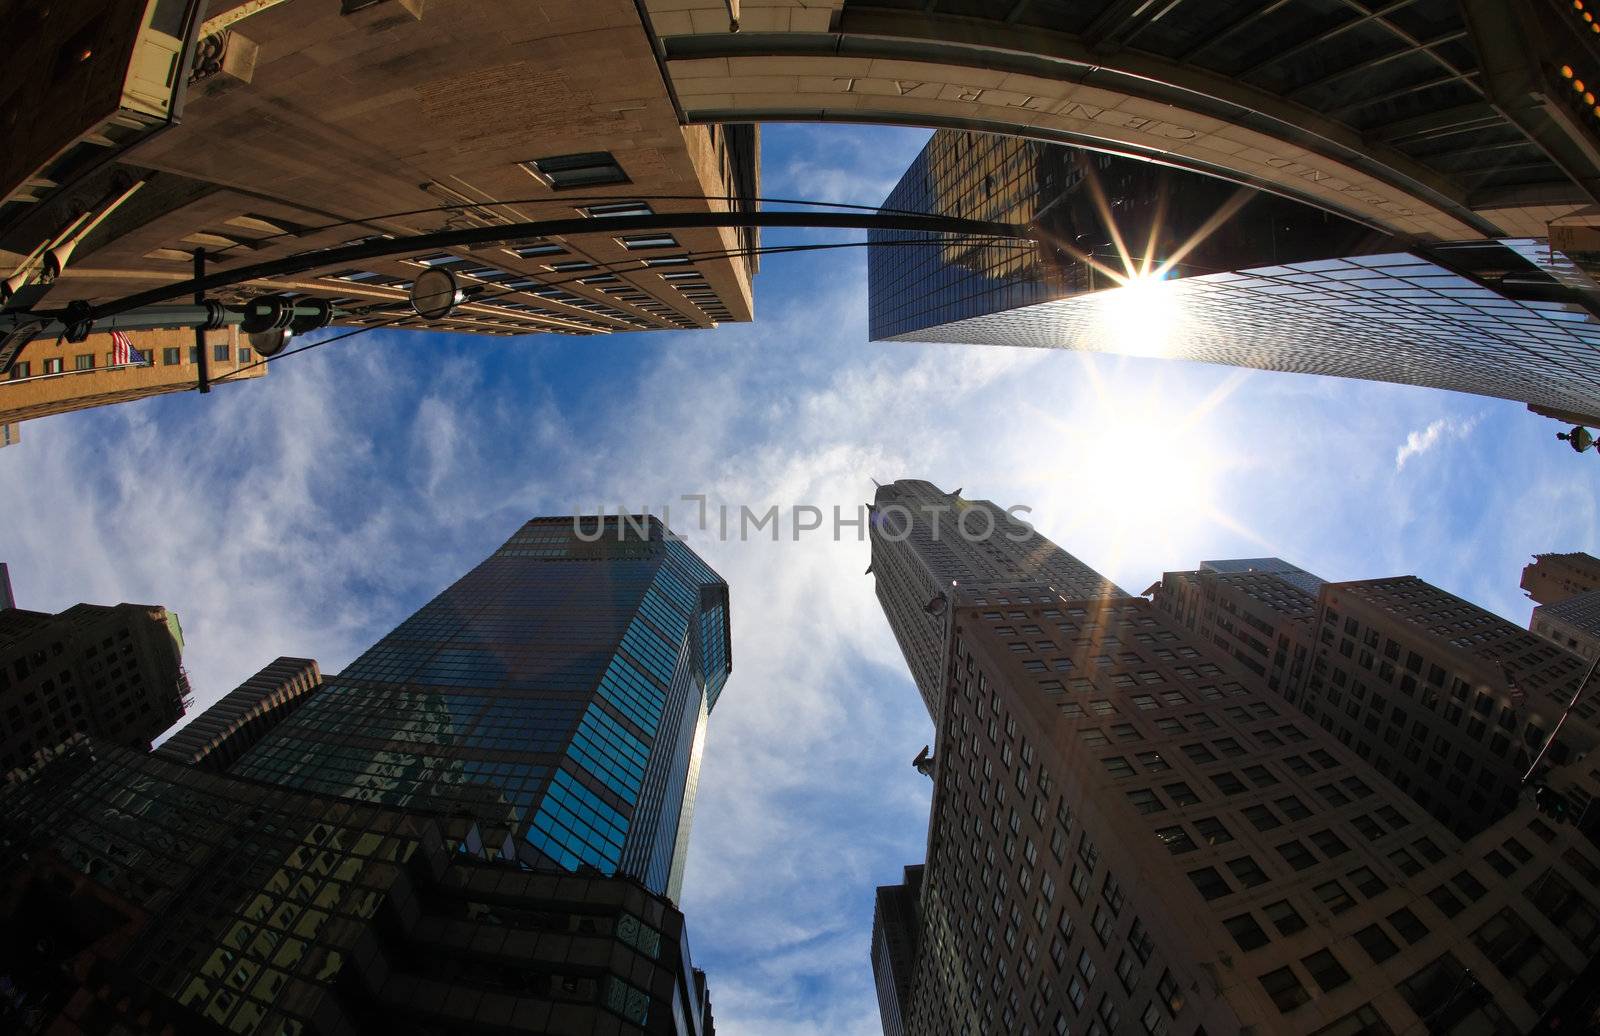 New York City, APril 17, 2009: The skyscrapers near grand central station in NYC (a fisheye view)